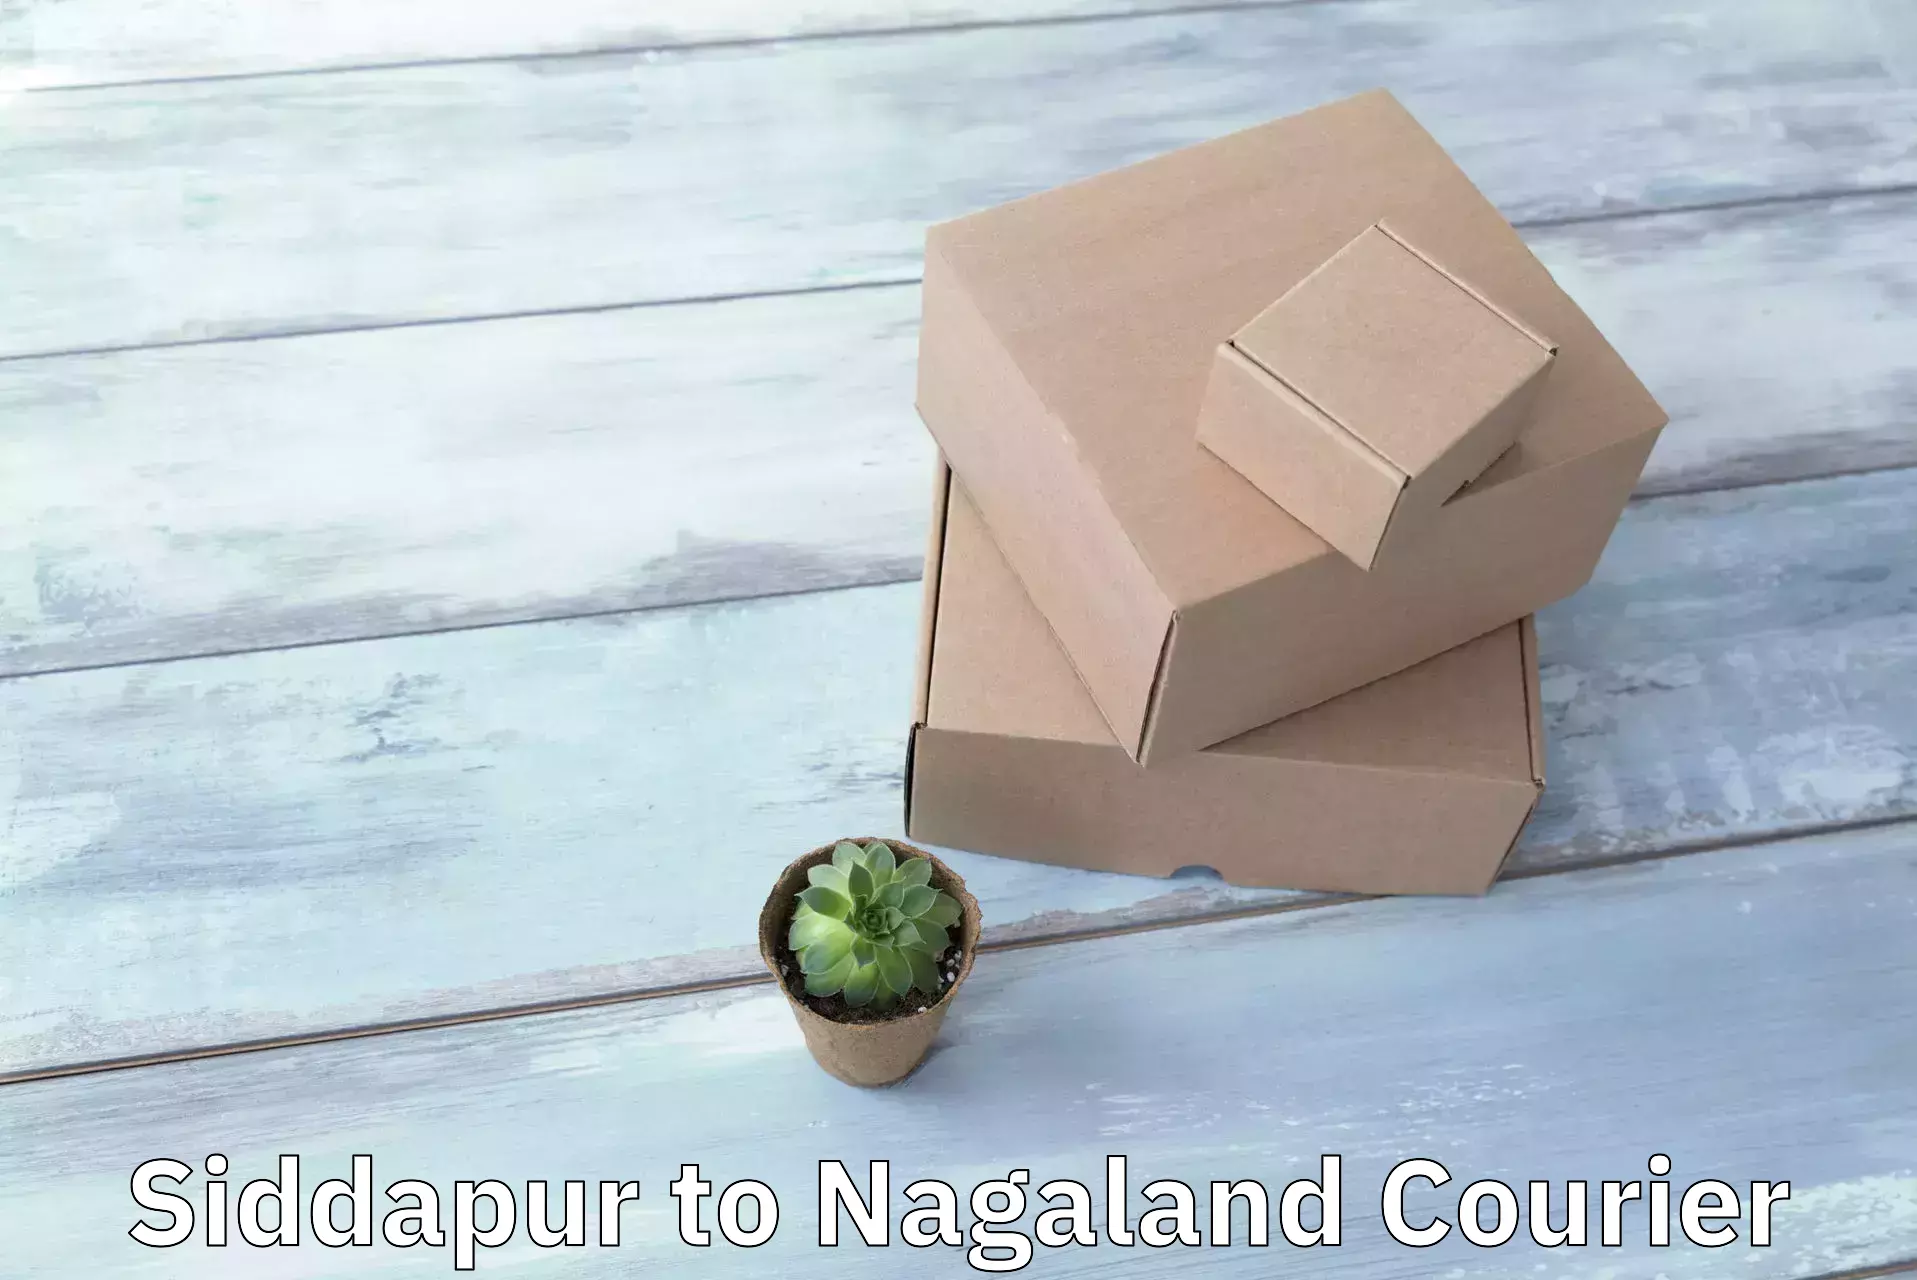 Business delivery service Siddapur to Nagaland